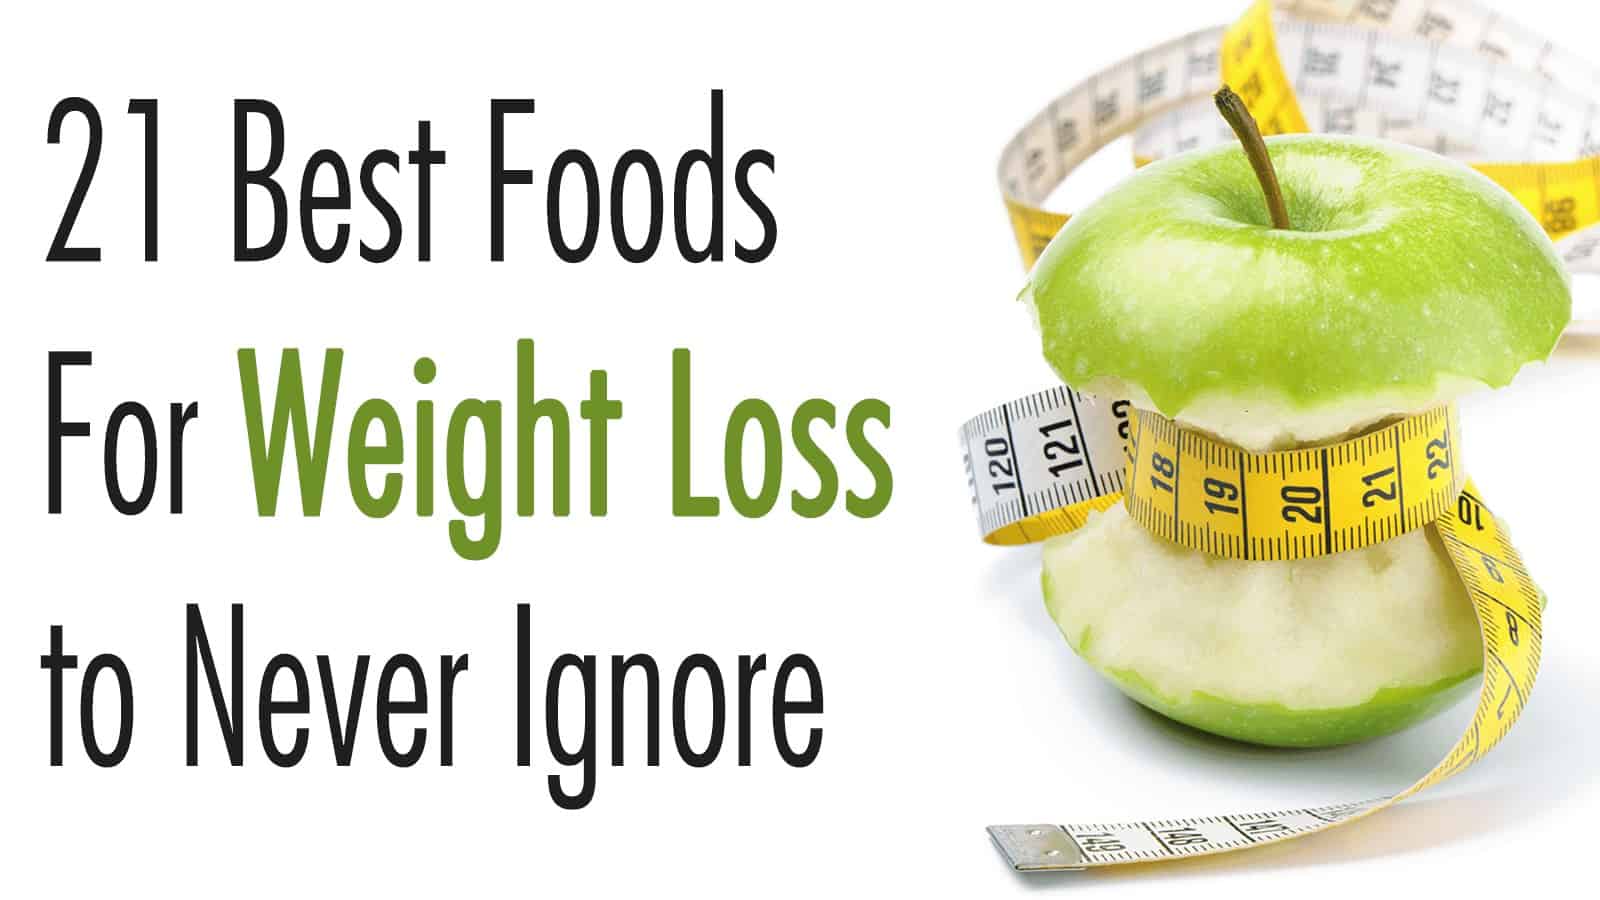 21 Best Foods For Weight Loss to Never Ignore